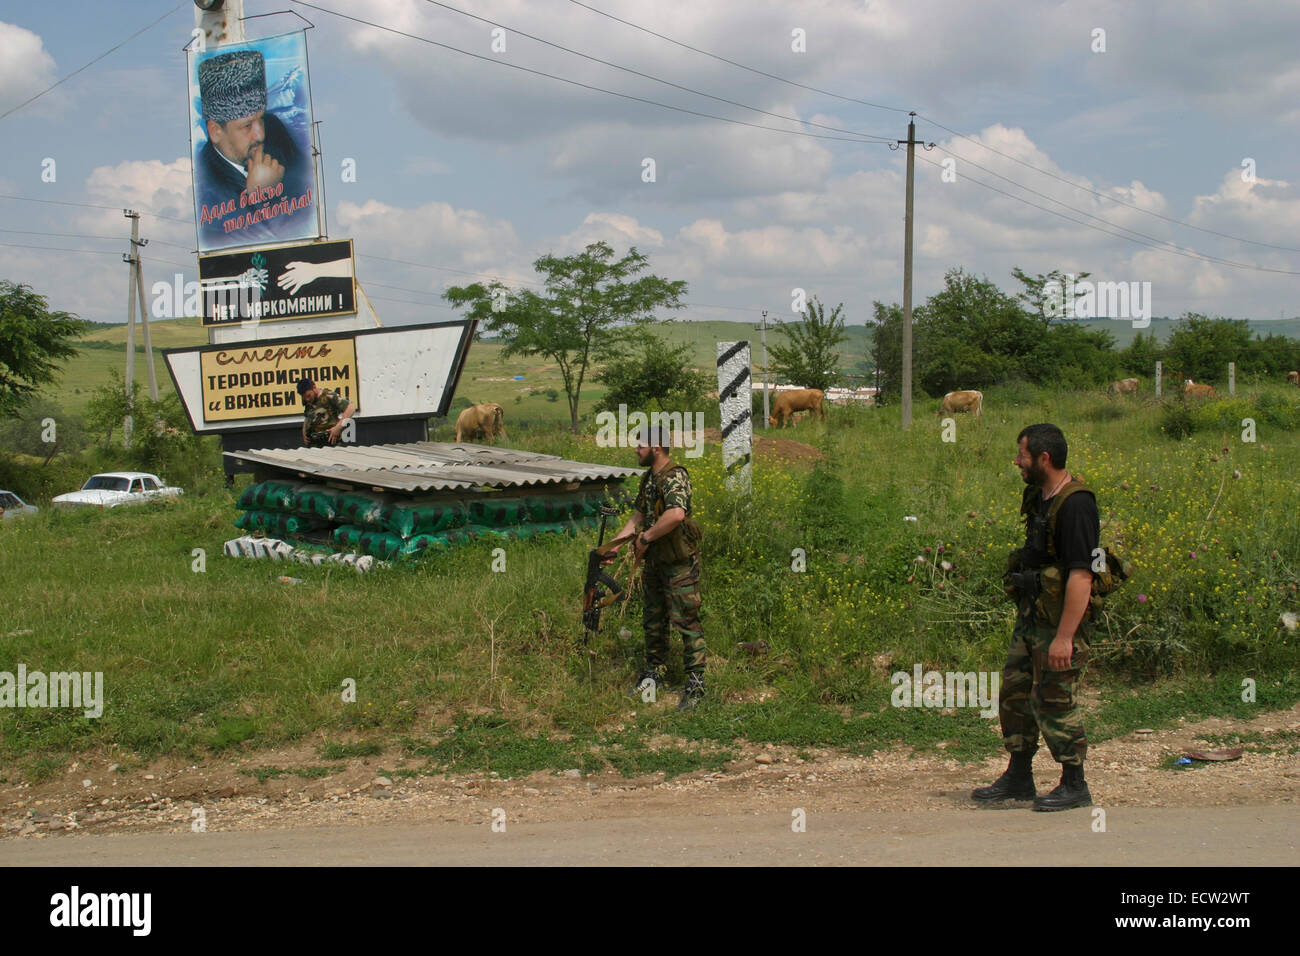 Entrance to the village of Tsentoroi, Chechnya, Russia. Under a photograph of the assassinated former Chechen president Akhmad Kadyrov a sign says 'No to drug addiction', and another 'Death to terrorists and wahhabites'. Stock Photo